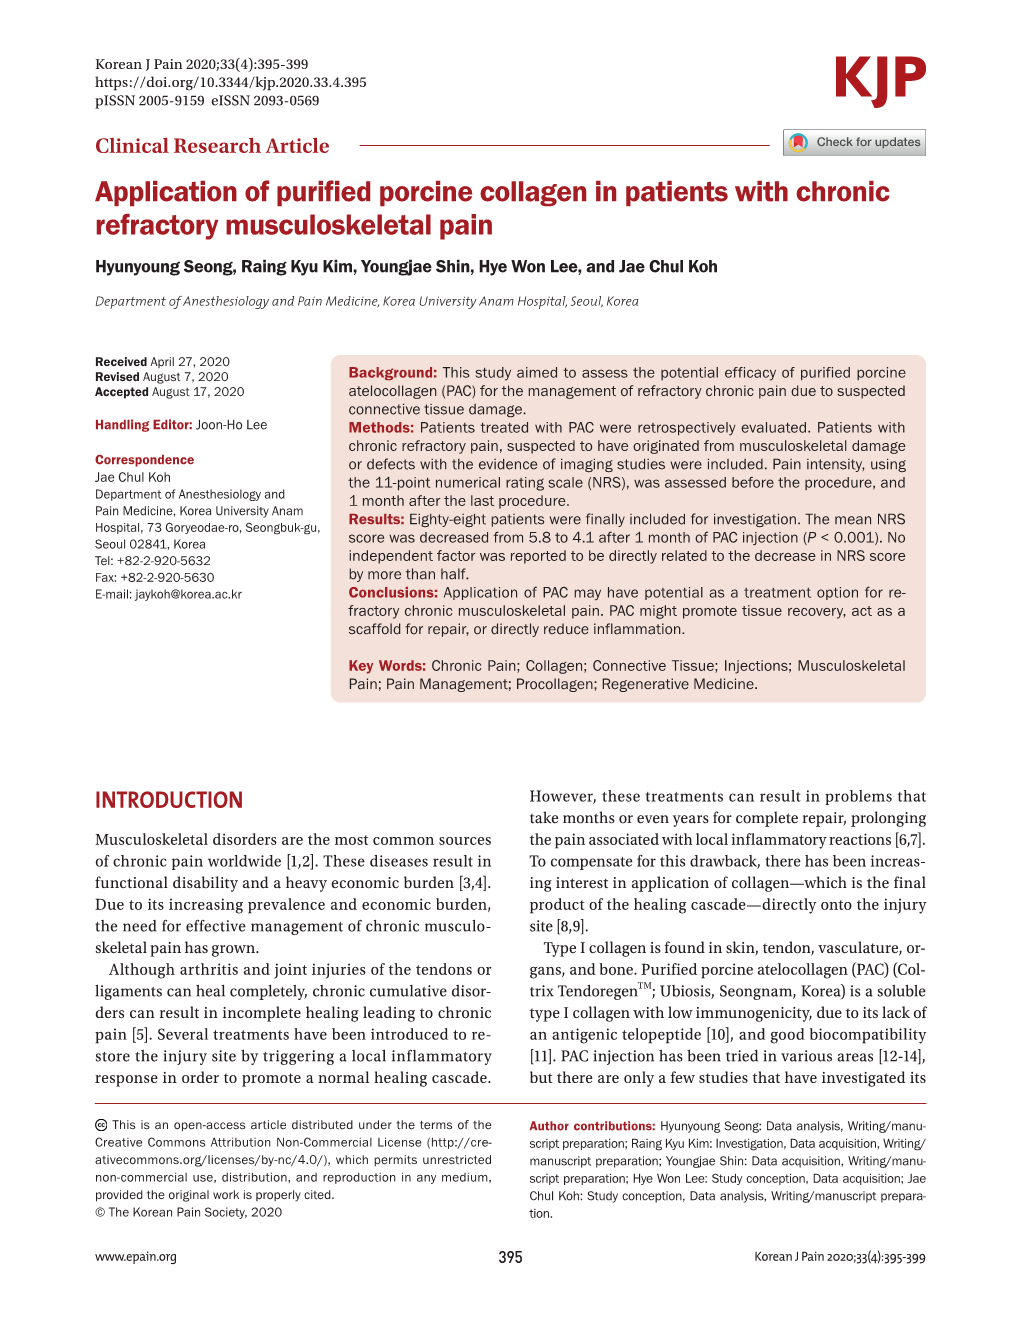 Application of Purified Porcine Collagen in Patients with Chronic